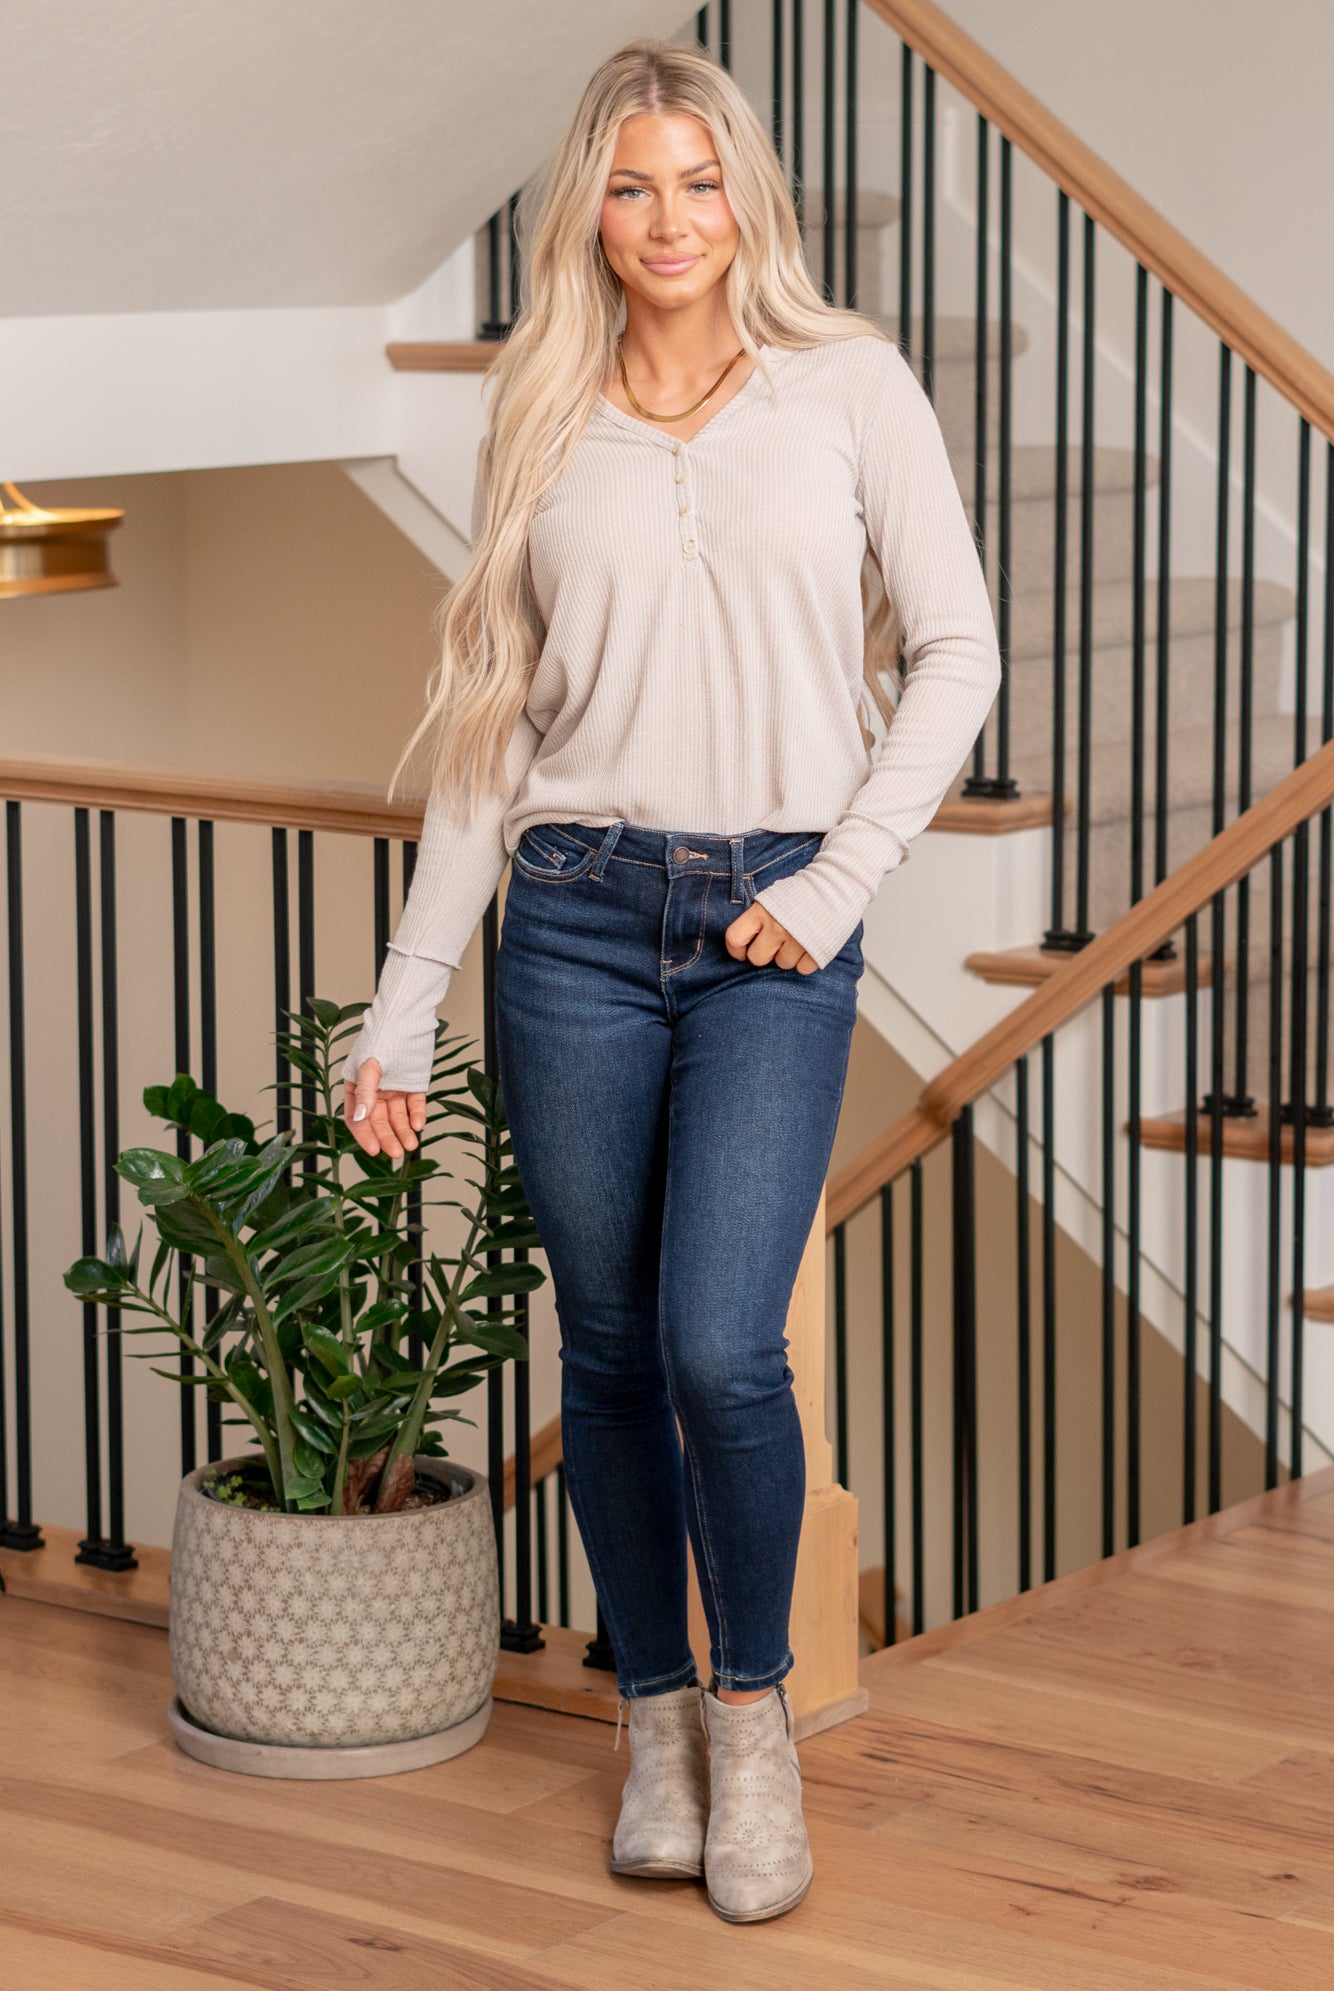 Lovervet by VERVET   These jeans offer a flattering mid-rise silhouette and a sleek skinny fit, providing a perfect balance of modern style and comfort. The ankle length adds a touch of versatility, making them suitable for various occasions.